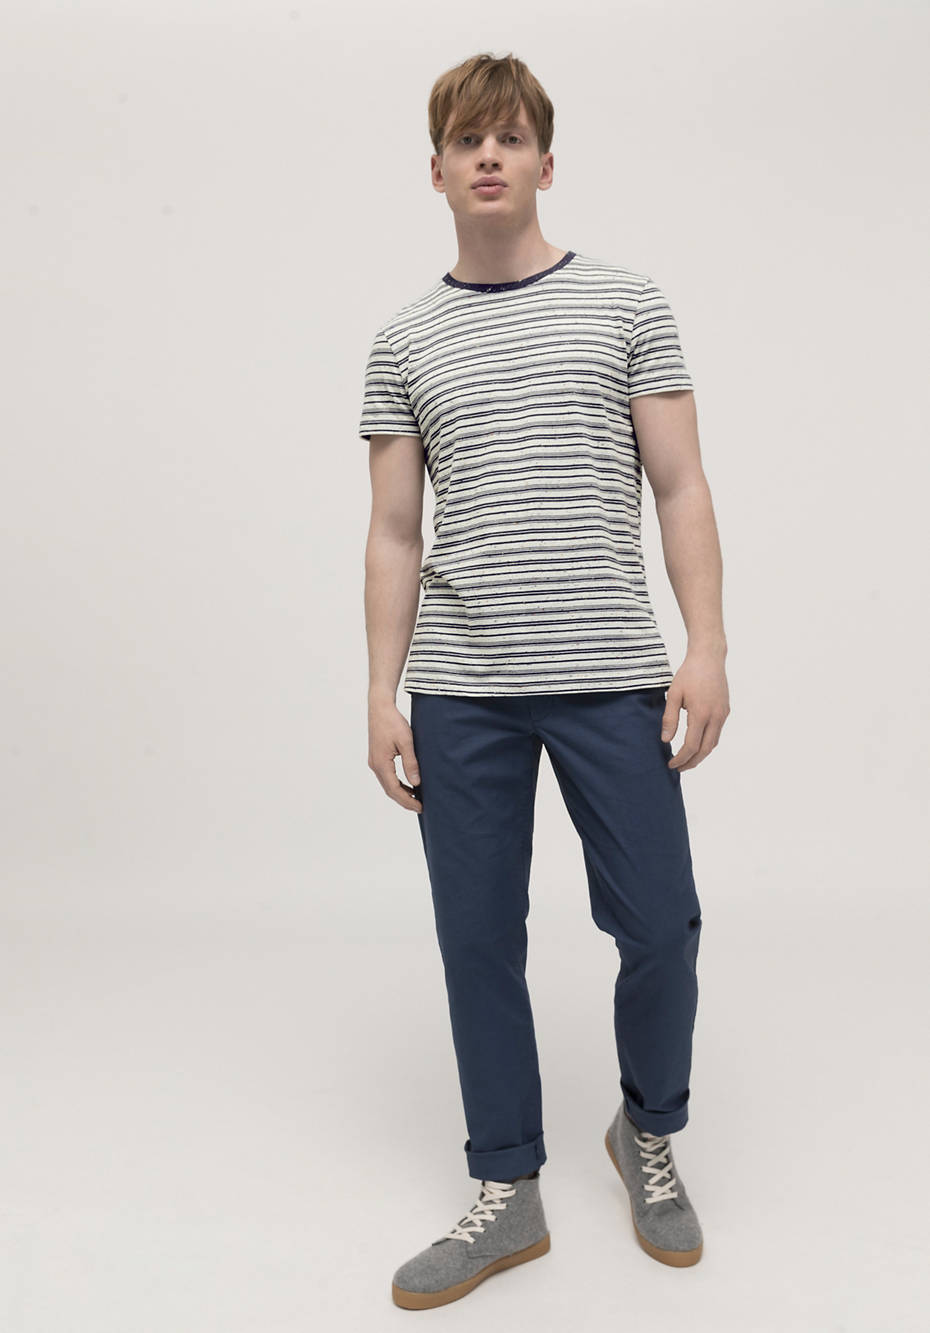 T-shirt made from pure organic cotton